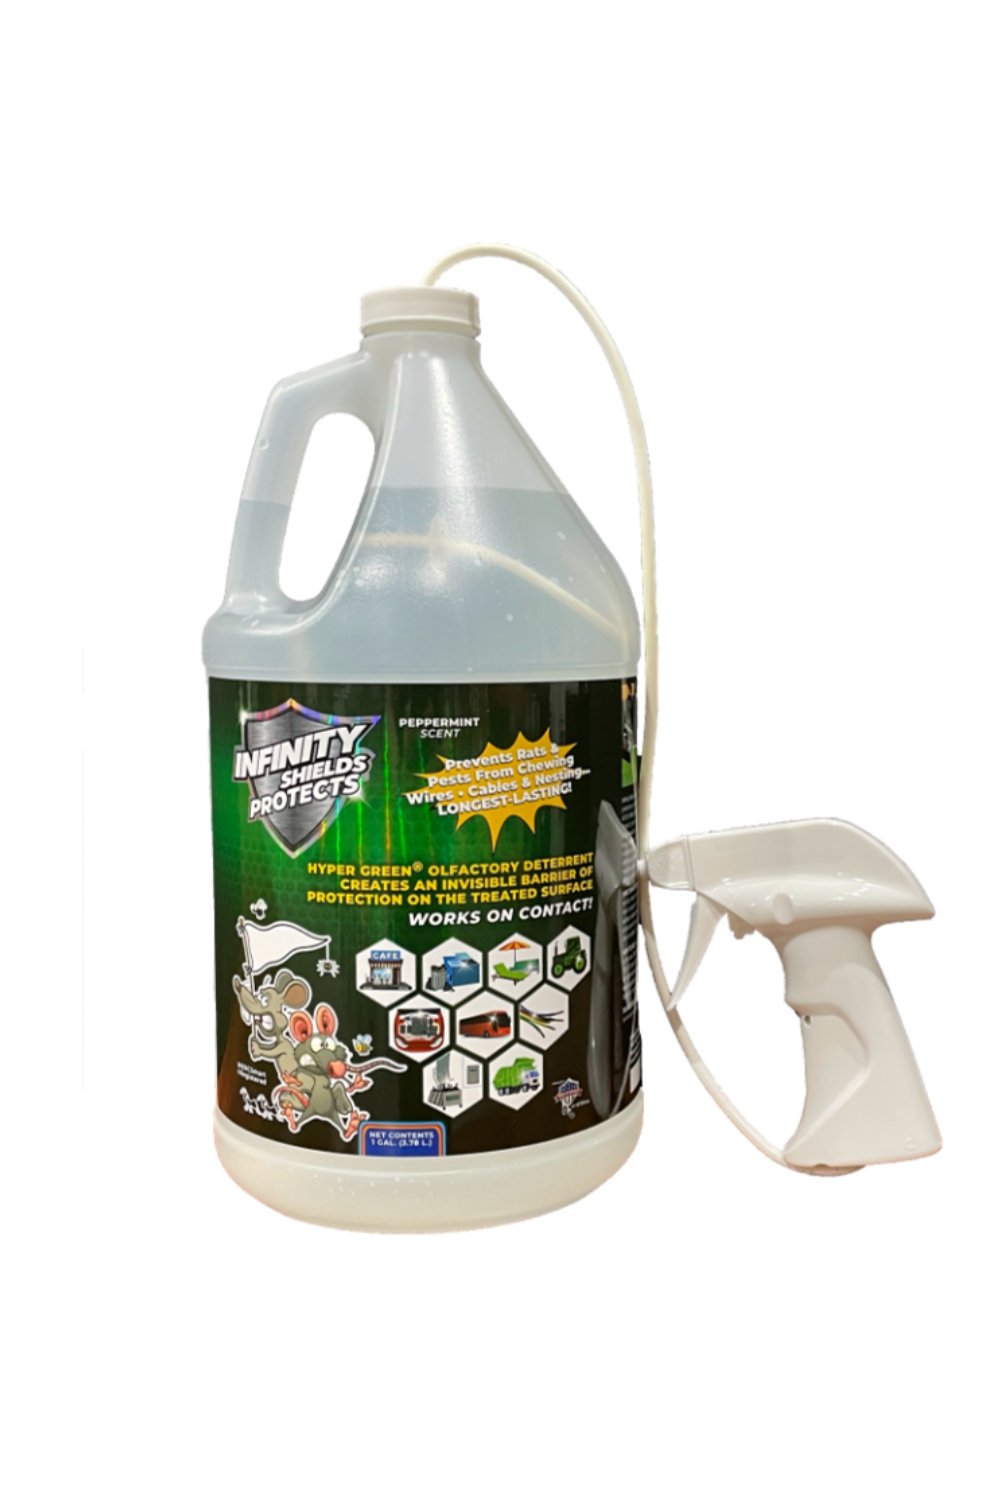 Infinity Shields Protects | Equestrian Fly Deterrent | 1 Gallon Spray Jug | Peppermint Mist